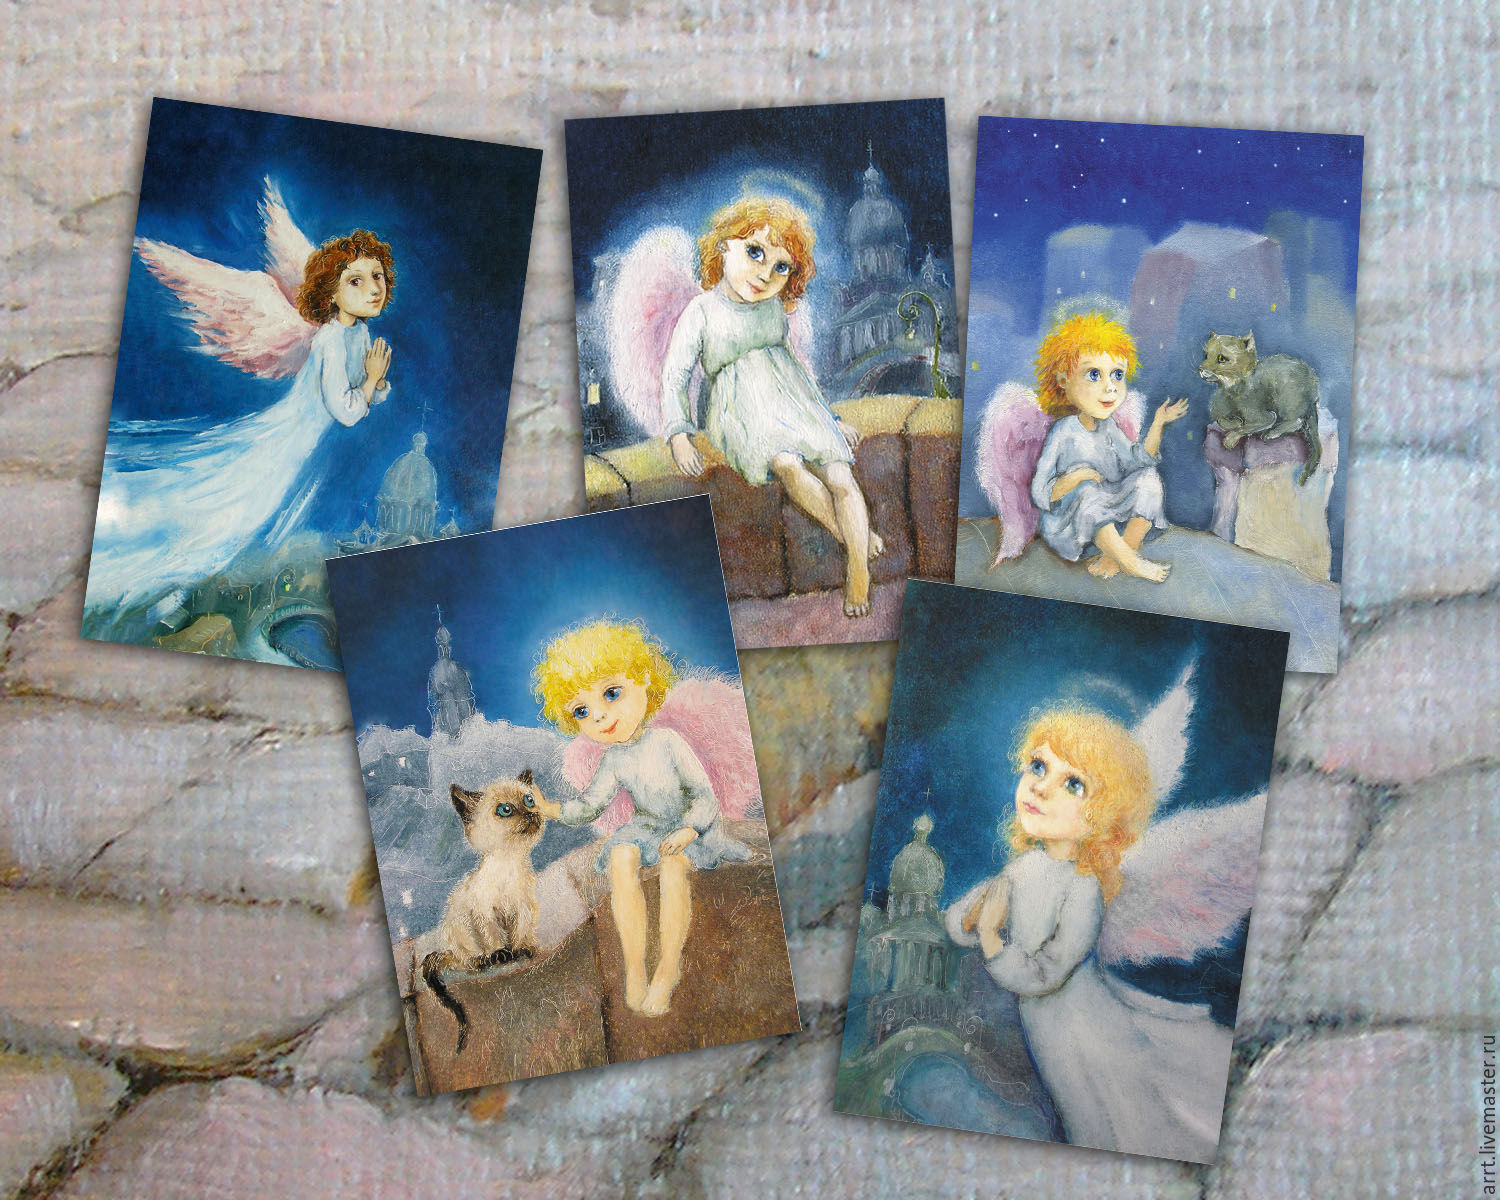 Angel and St. Petersburg Set of 5 cards for Christmas or birthday, Cards, St. Petersburg,  Фото №1